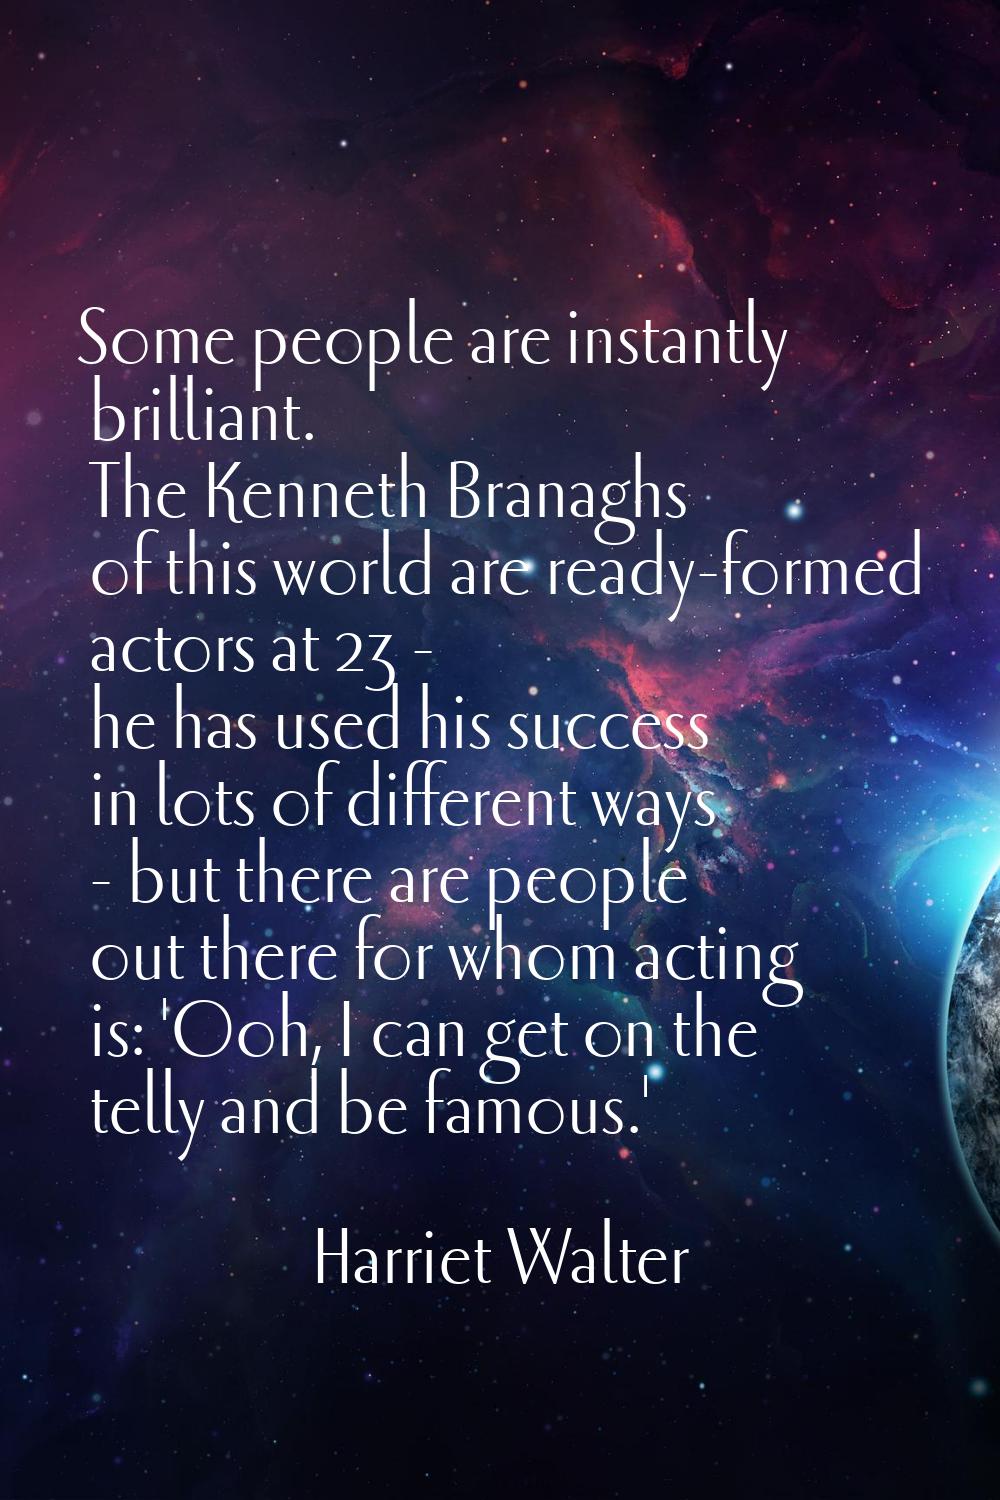 Some people are instantly brilliant. The Kenneth Branaghs of this world are ready-formed actors at 